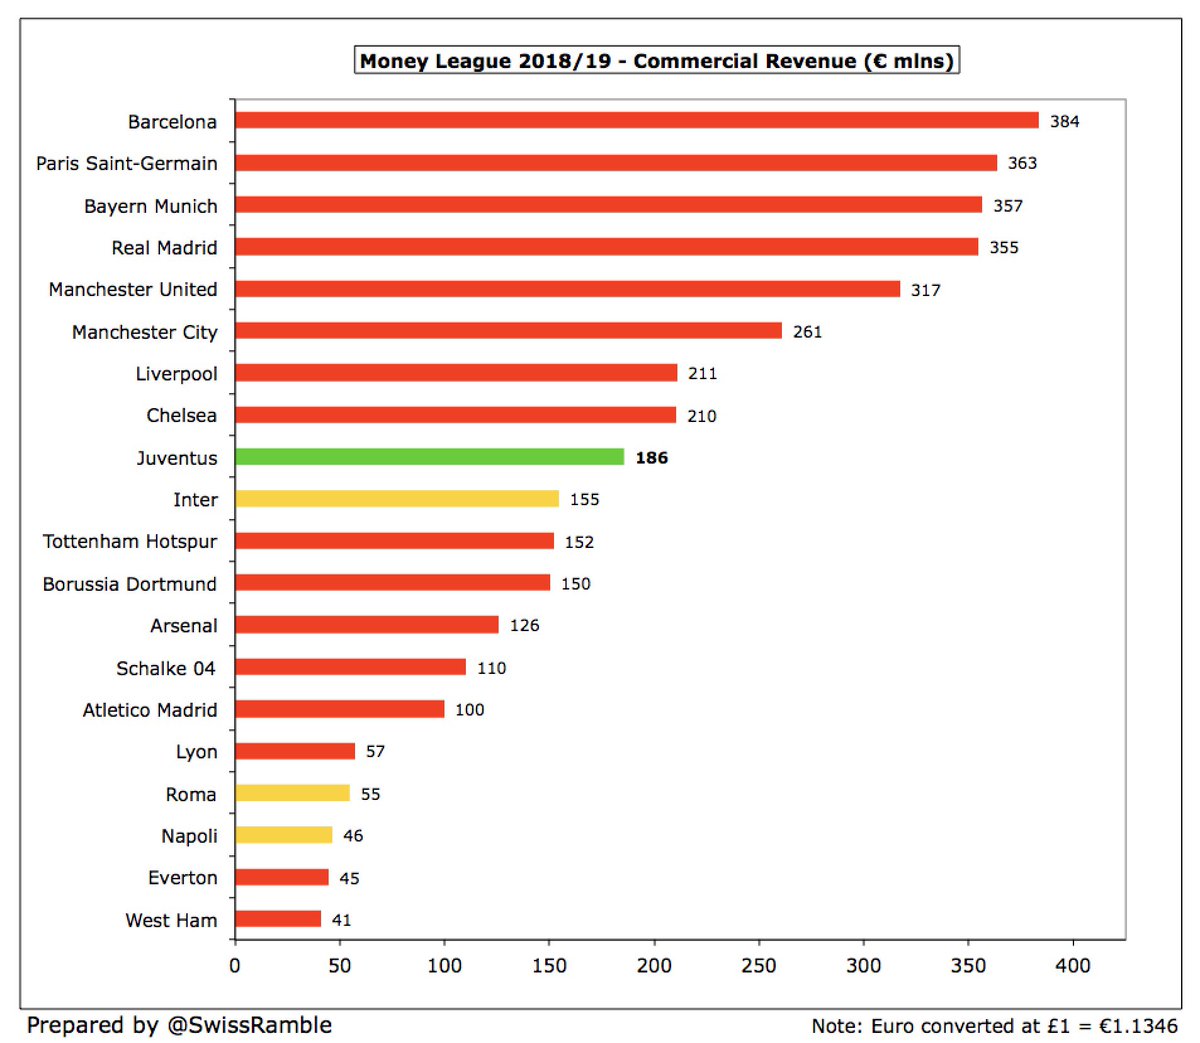 The increase in  #Juventus sponsorship deals is vital if they want to financially compete with the leading clubs in Spain, England, Germany and France, as their commercial income is much higher, e.g. five clubs were well above €300m in the 2018/19 Money League.